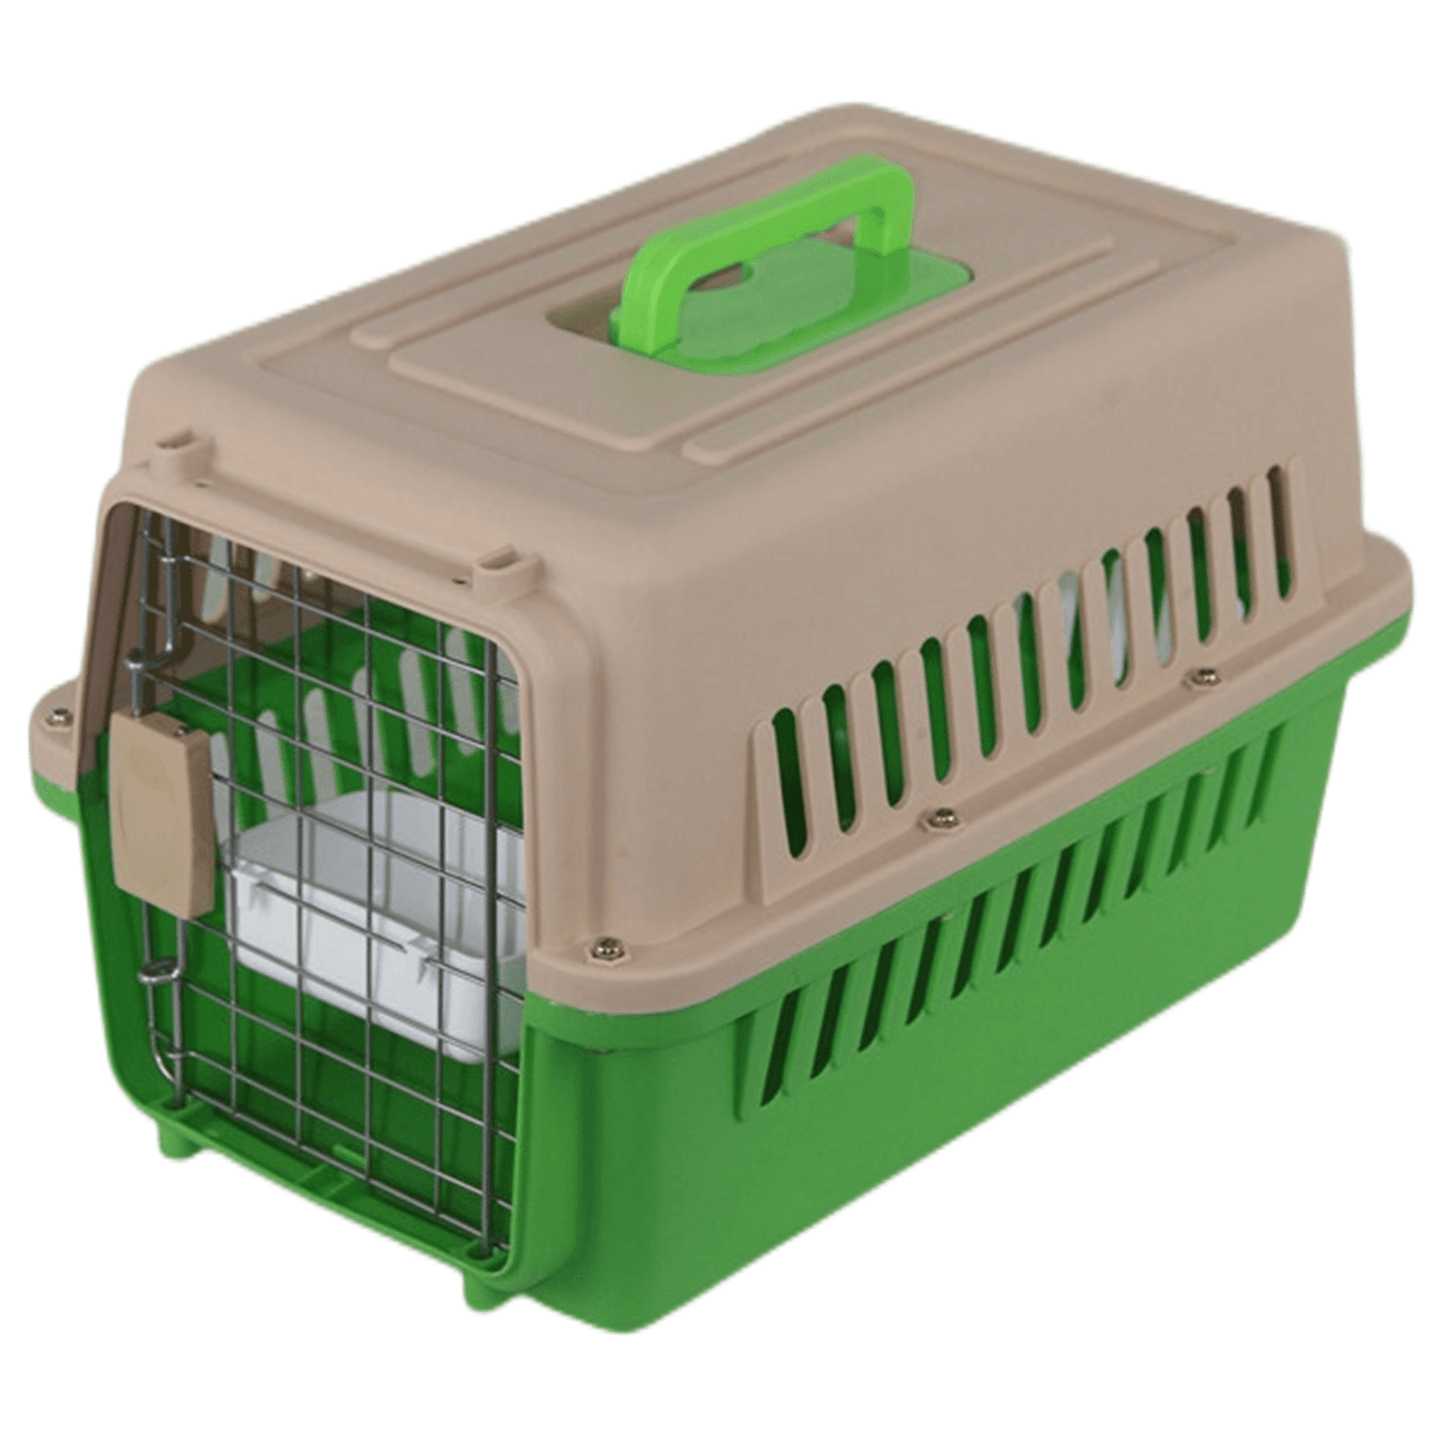 YES4PETS New Medium Dog Cat Rabbit Crate Pet Airline Carrier Cage With Bowl & Tray Green